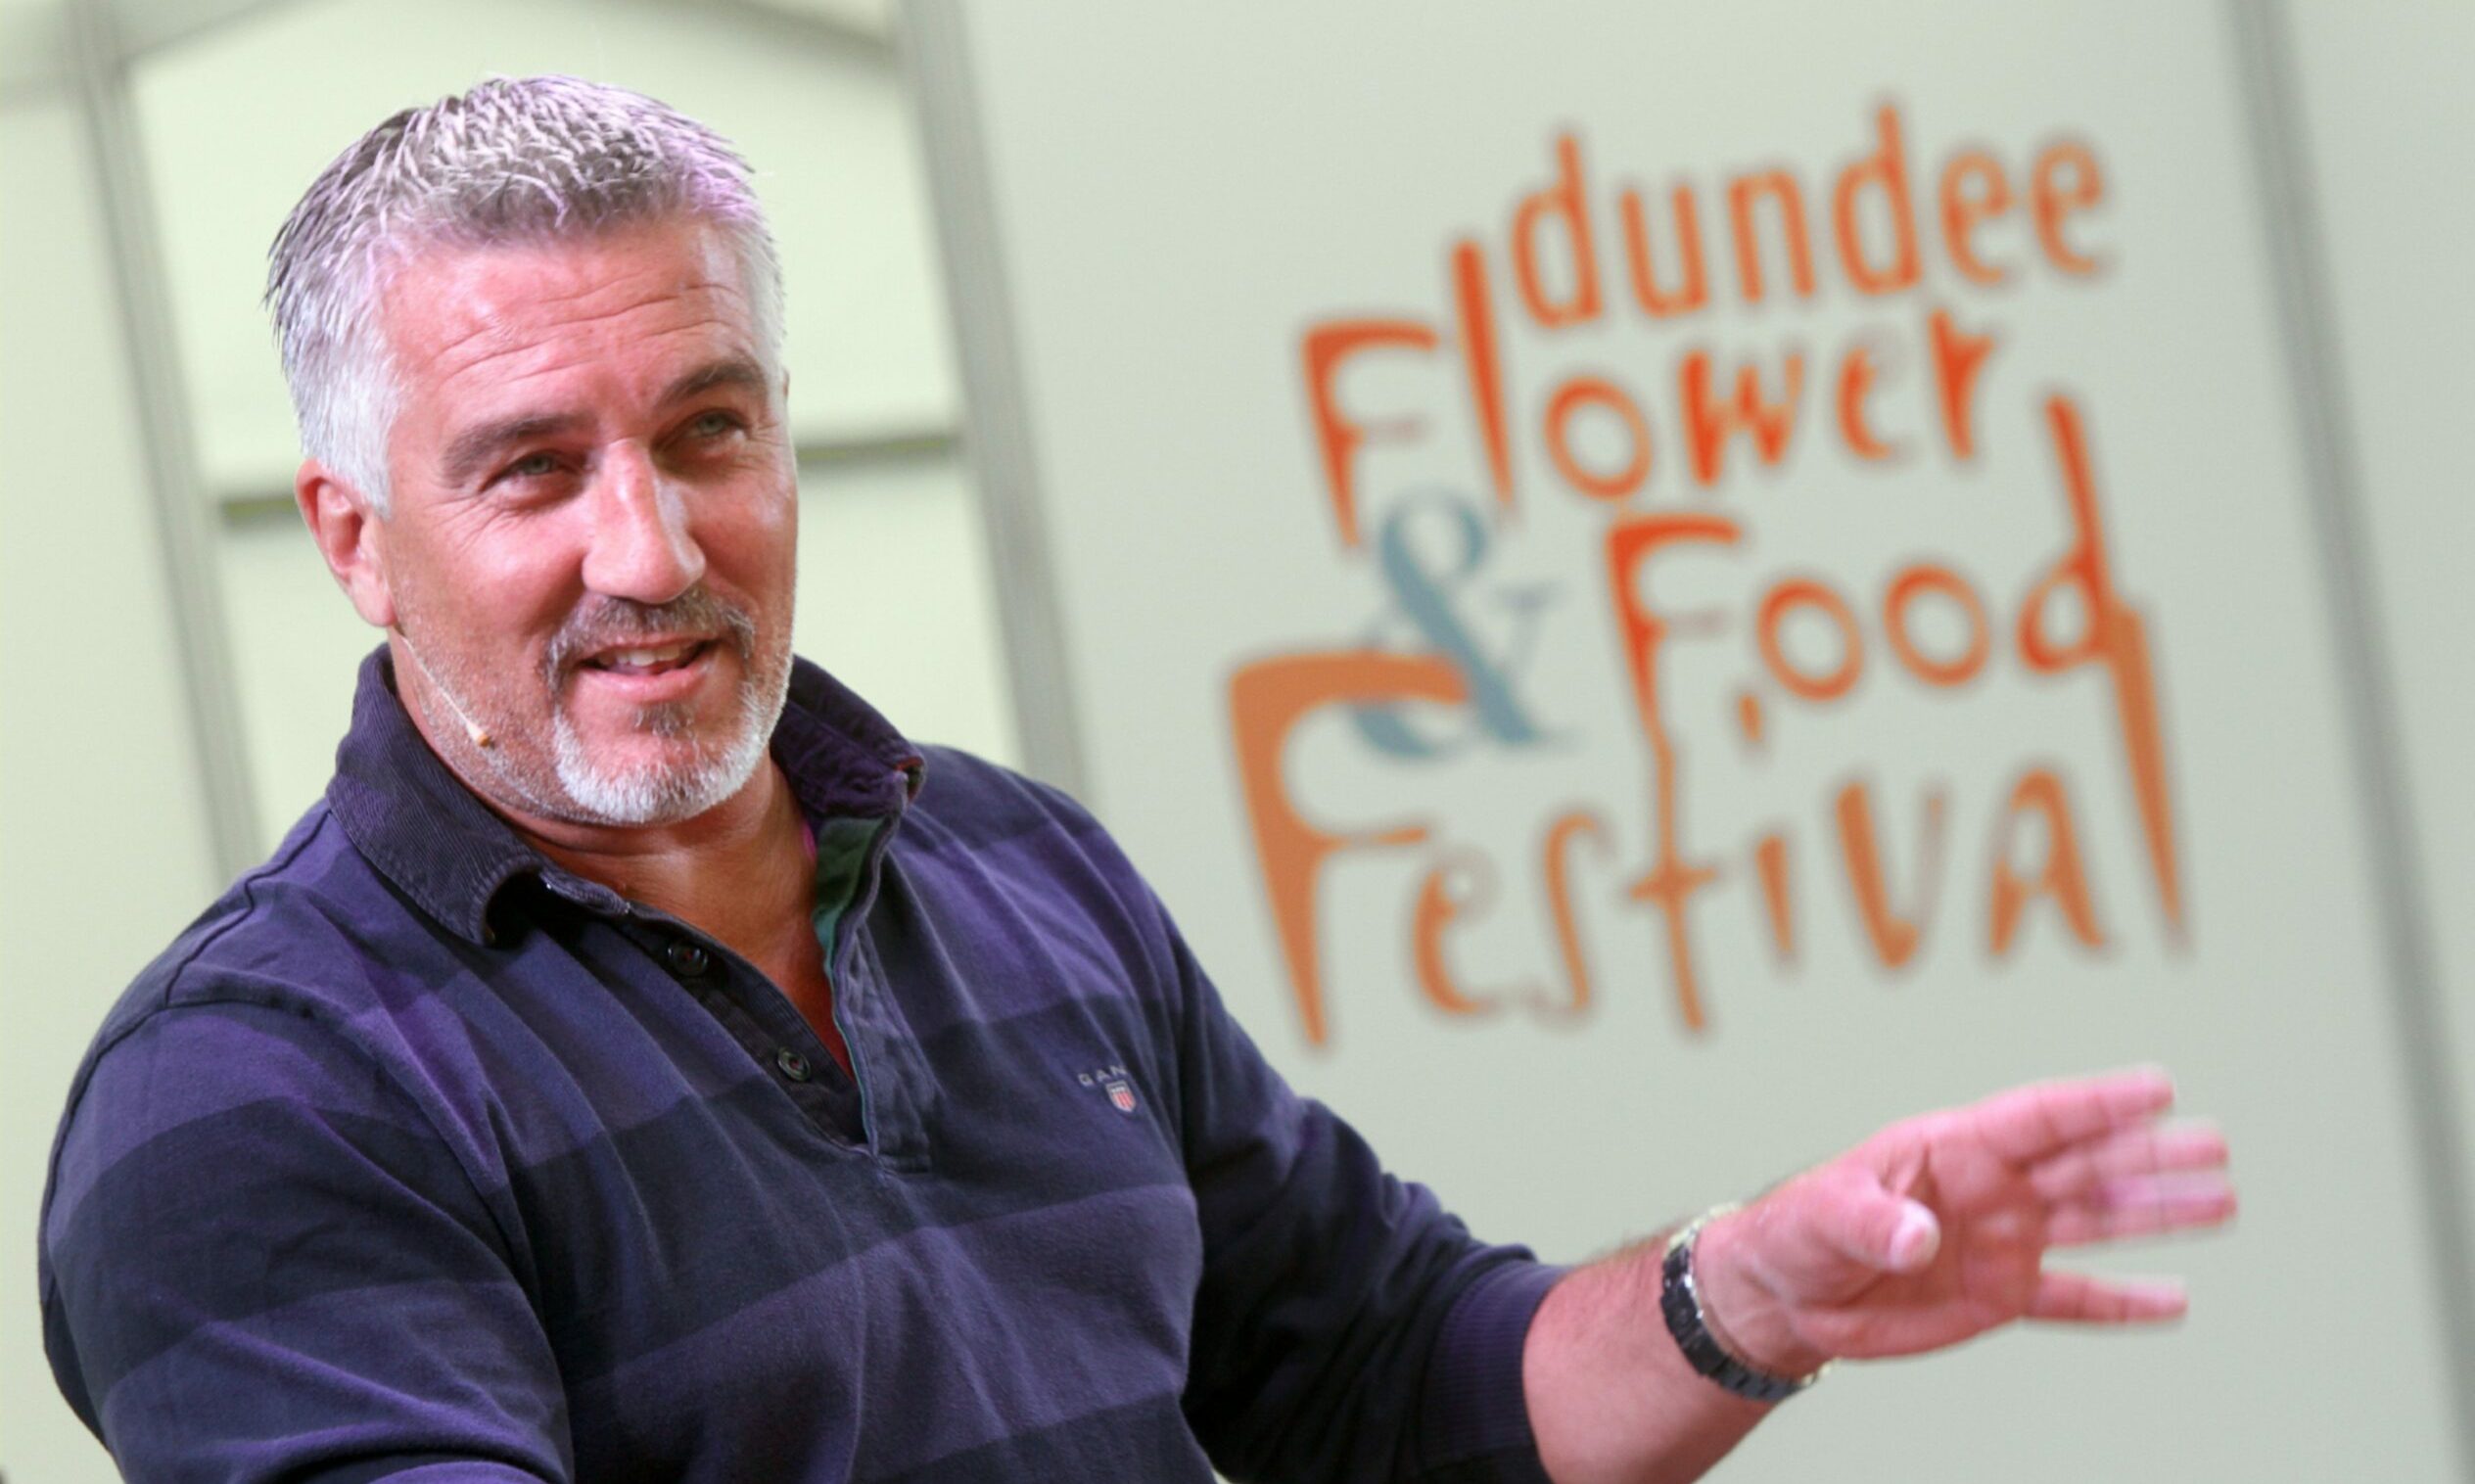 The Dundee Flower and Food Festival used to attract big names like Paul Hollywood, before being axed last year.